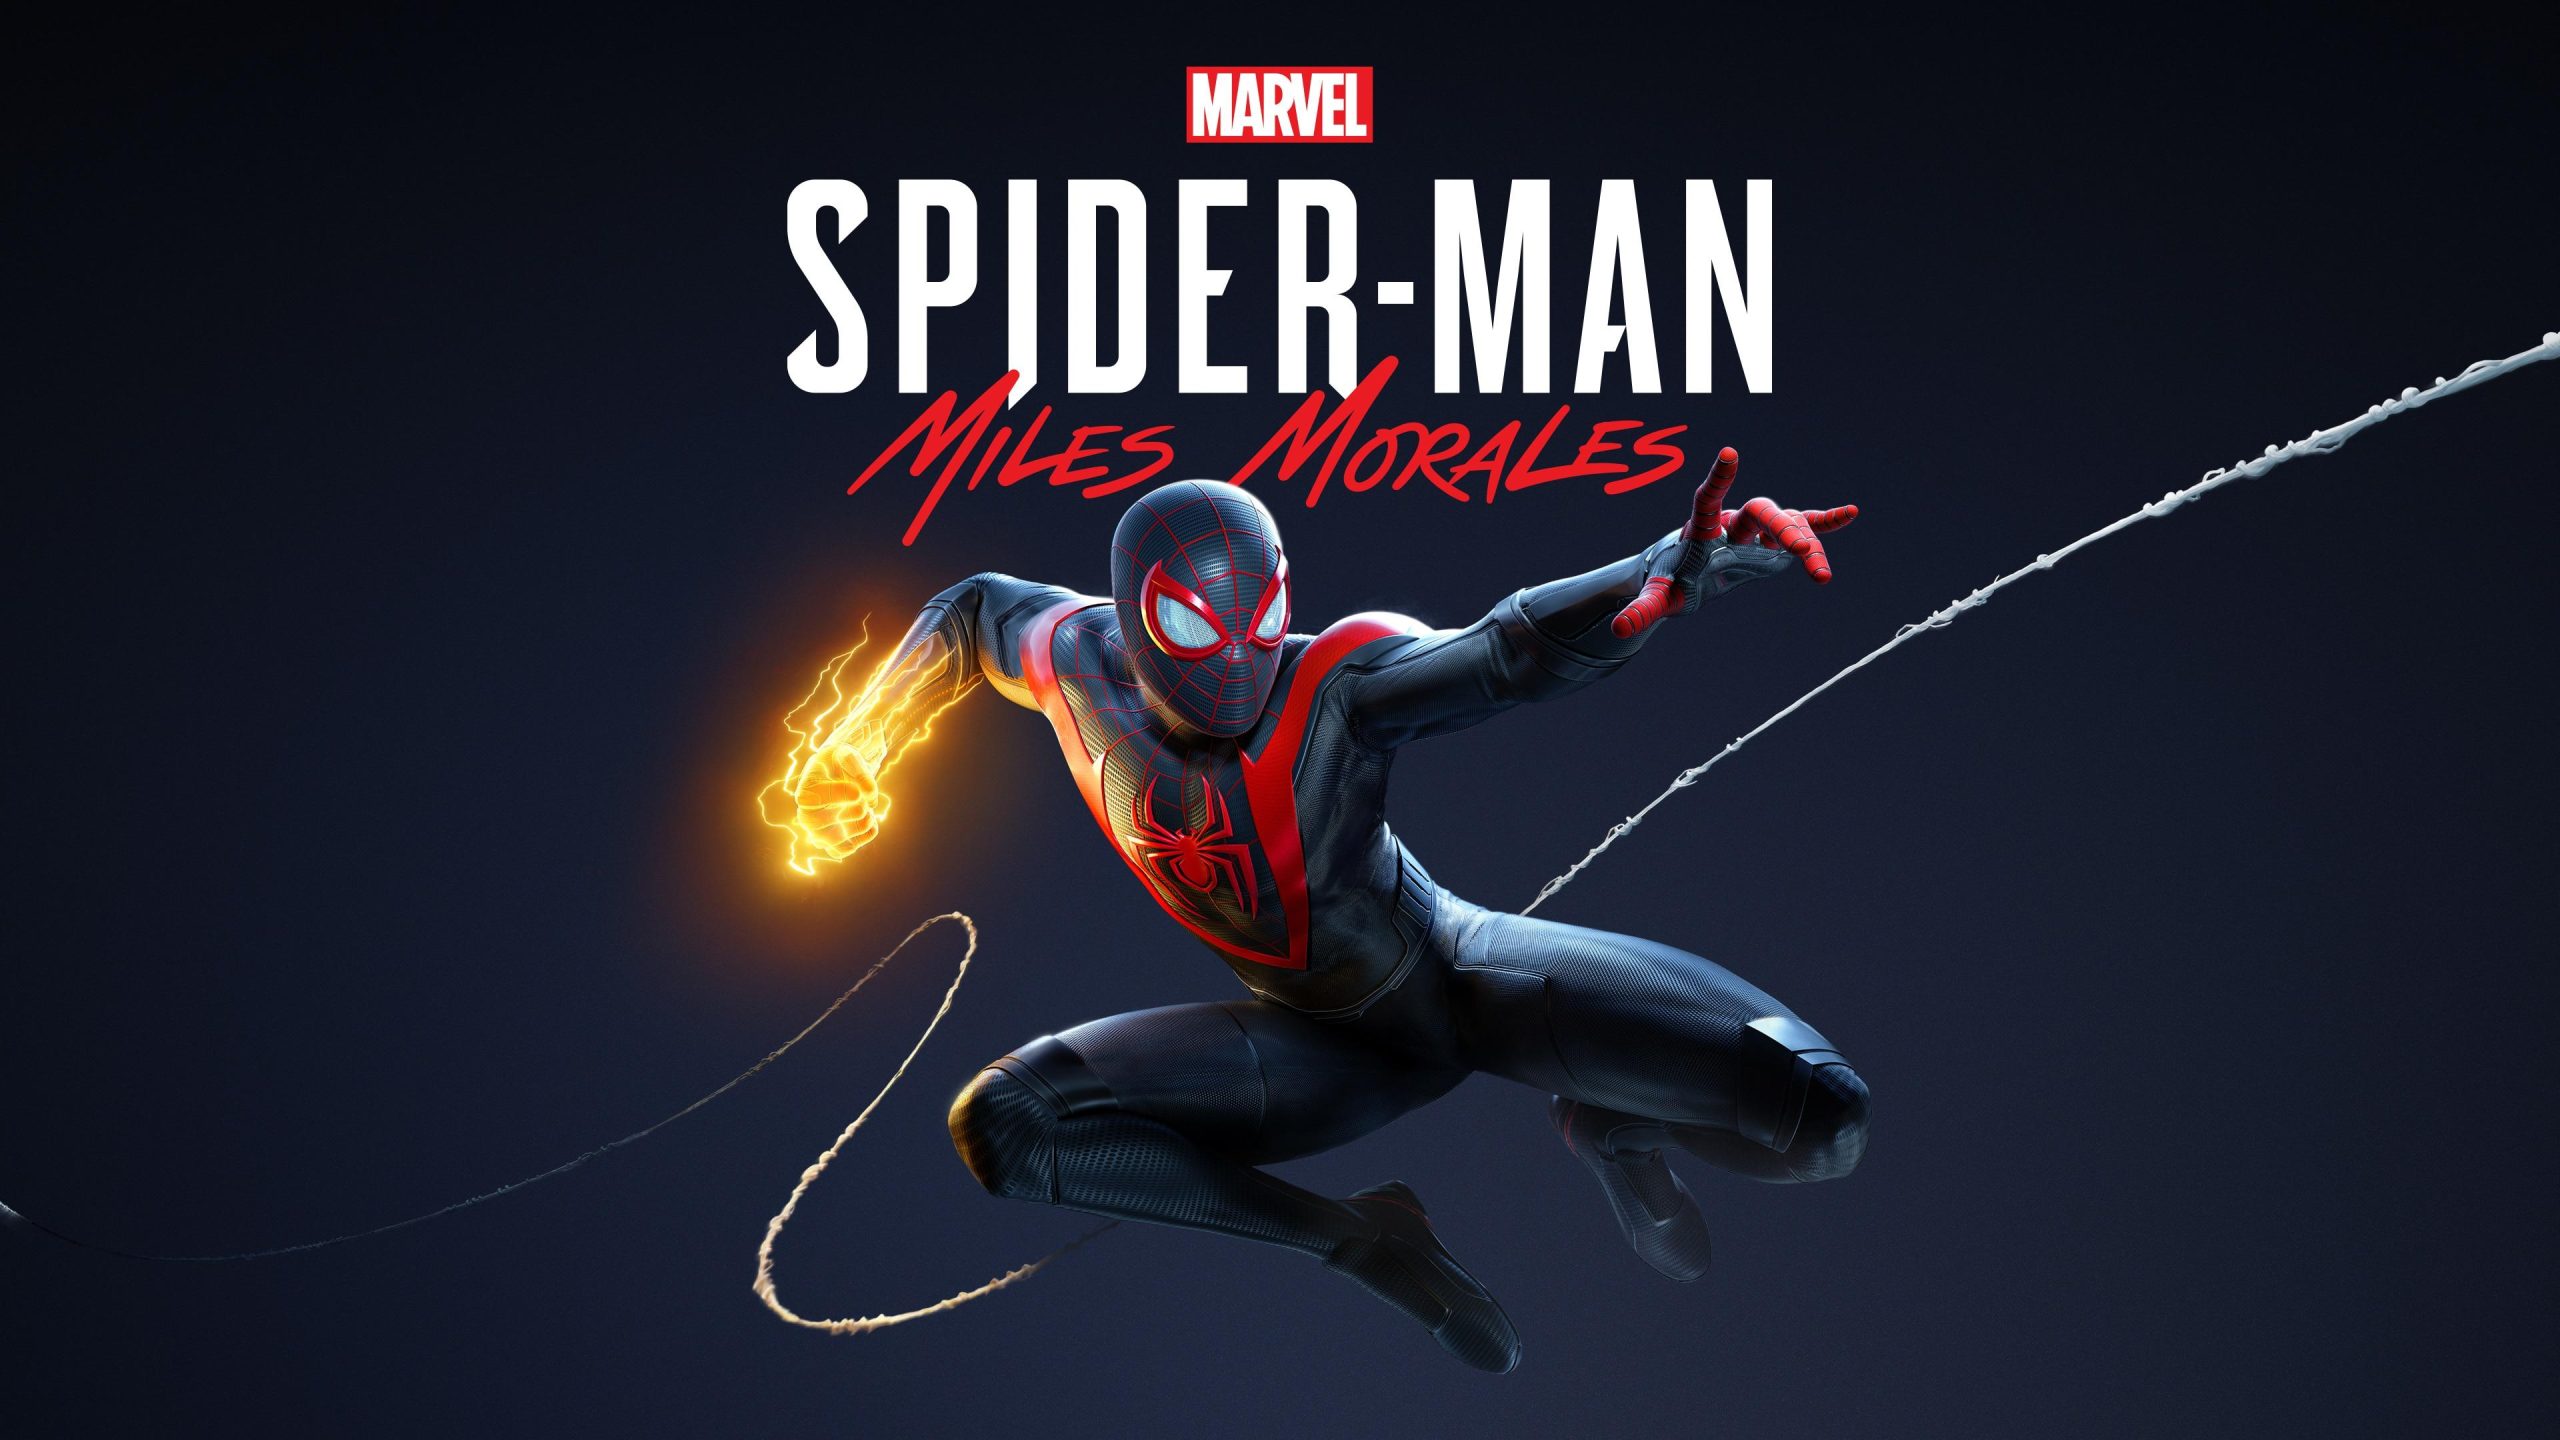 Spider Man Miles Morales PS4 Free 4K Wallpapers, Spider Man Miles Morales PS4, Movies